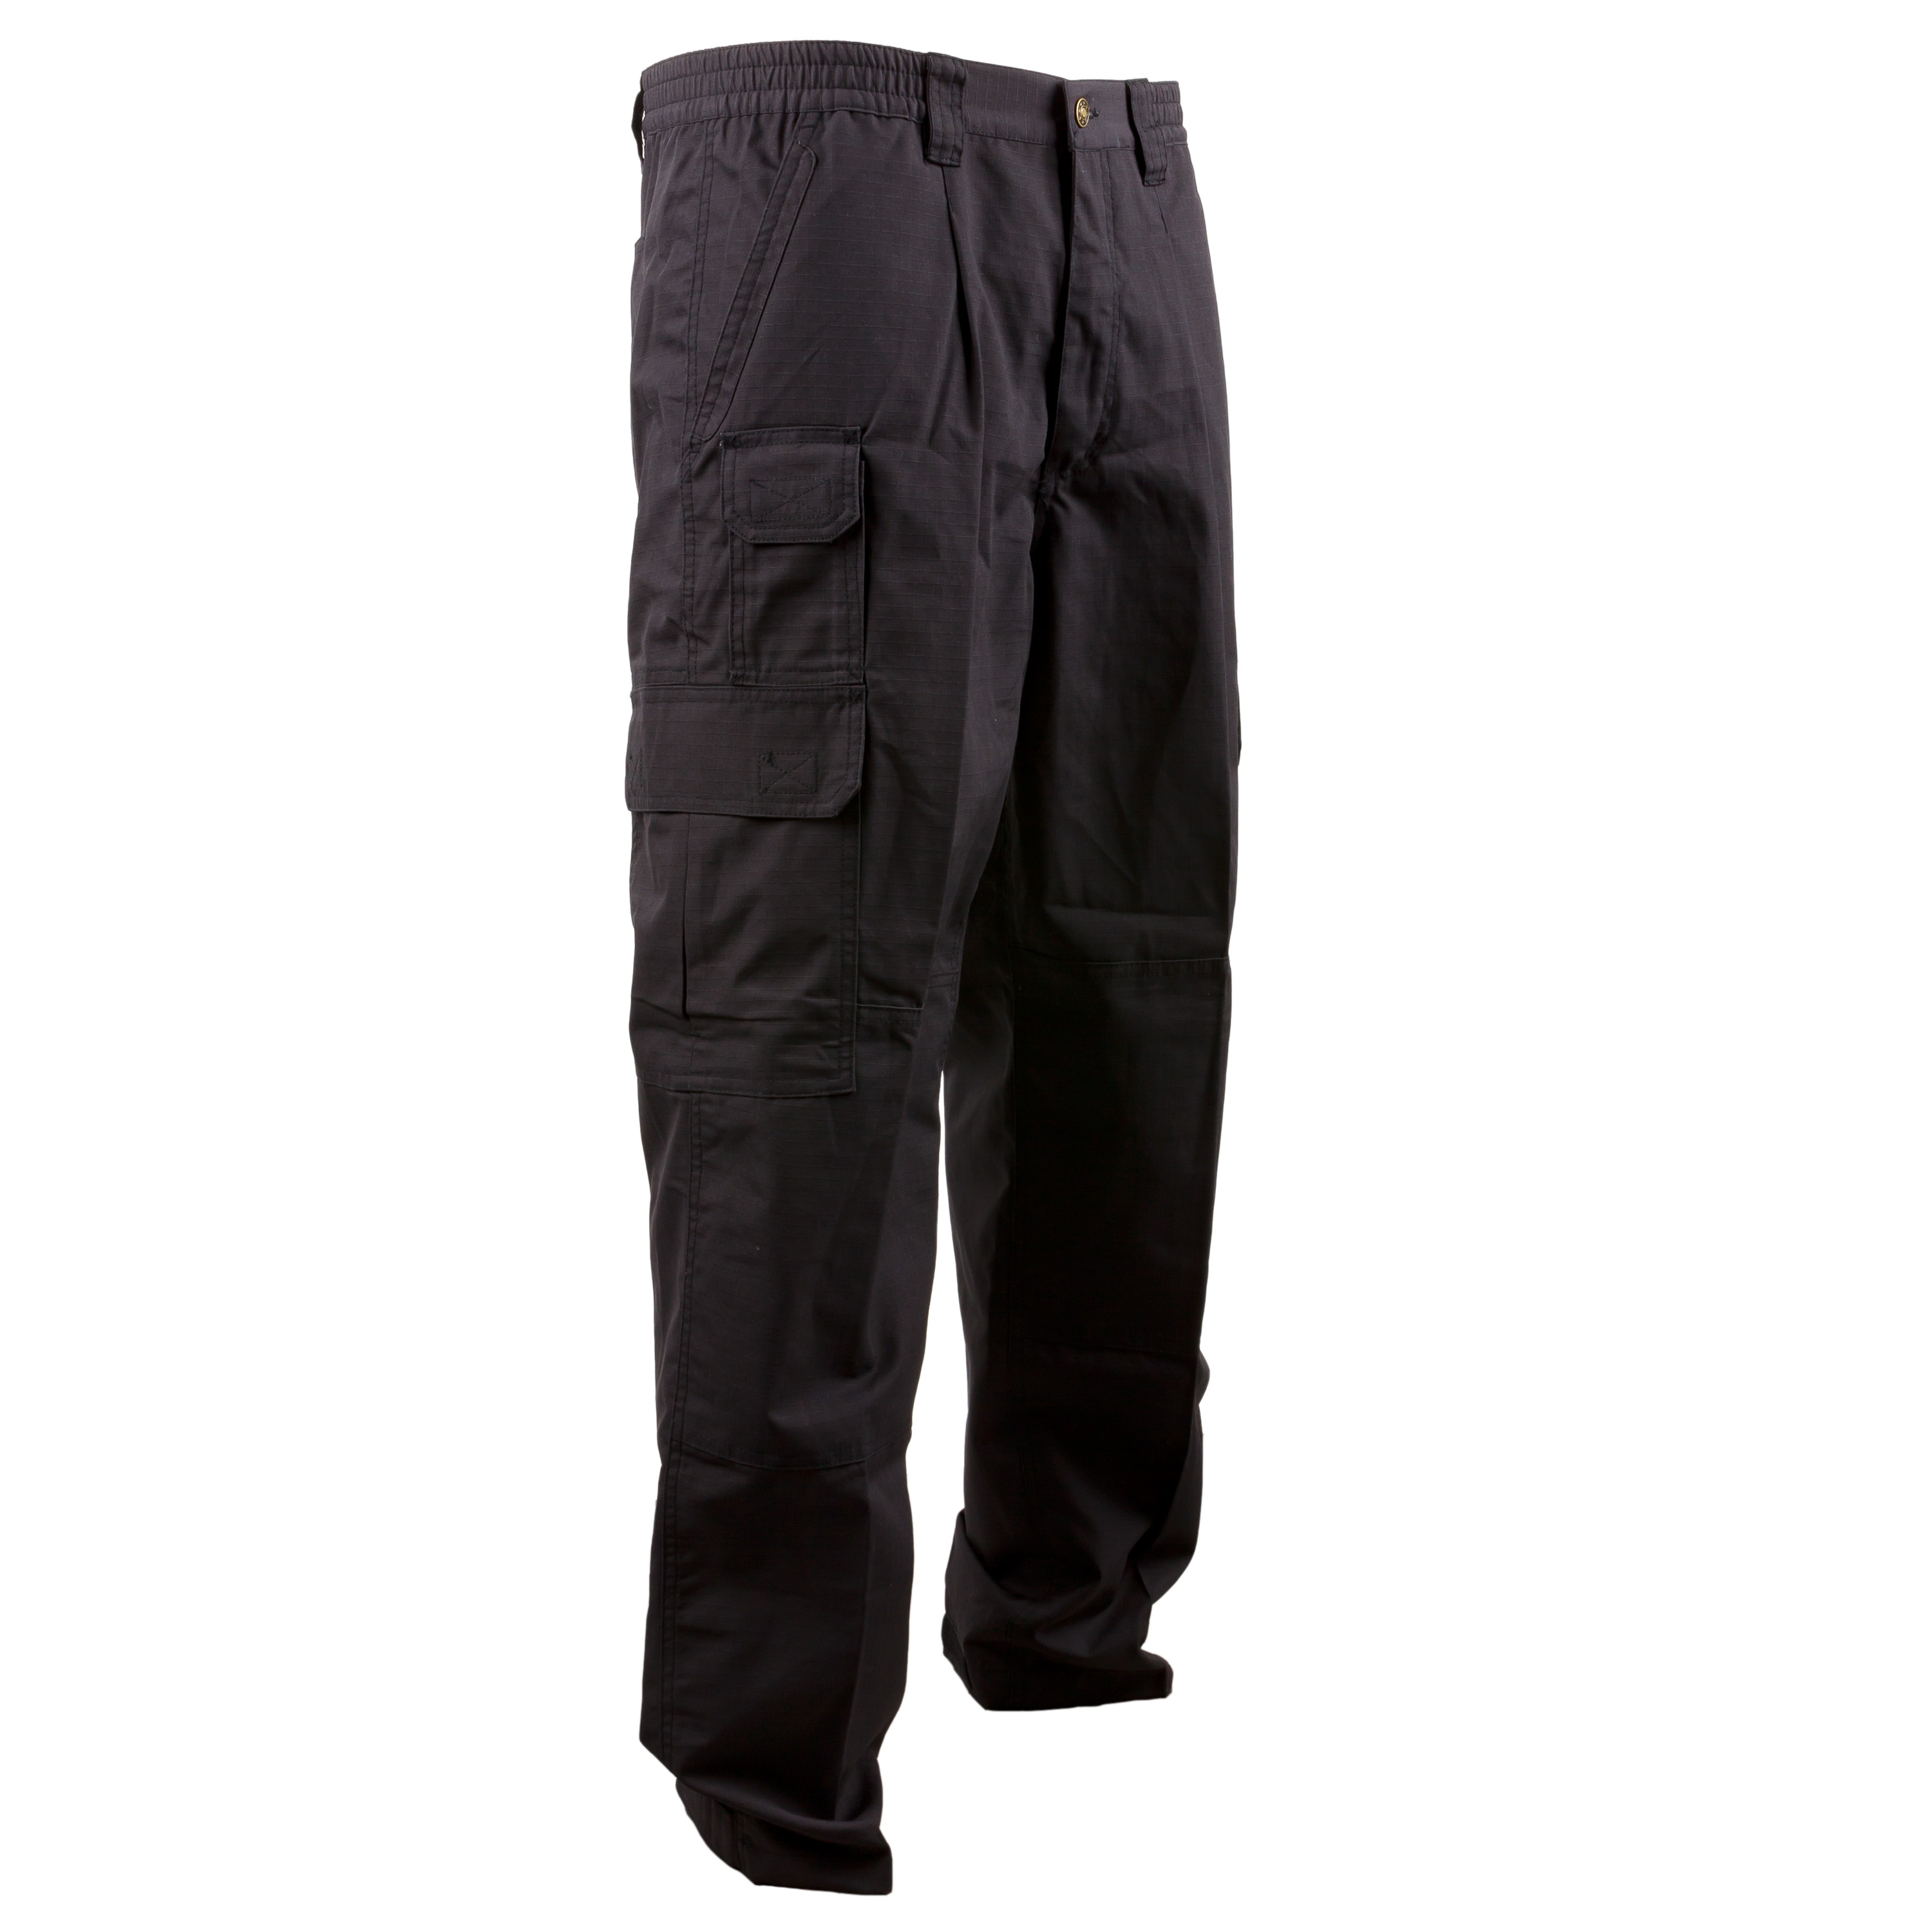 Purchase the Security Pants Mil-Tec black by ASMC